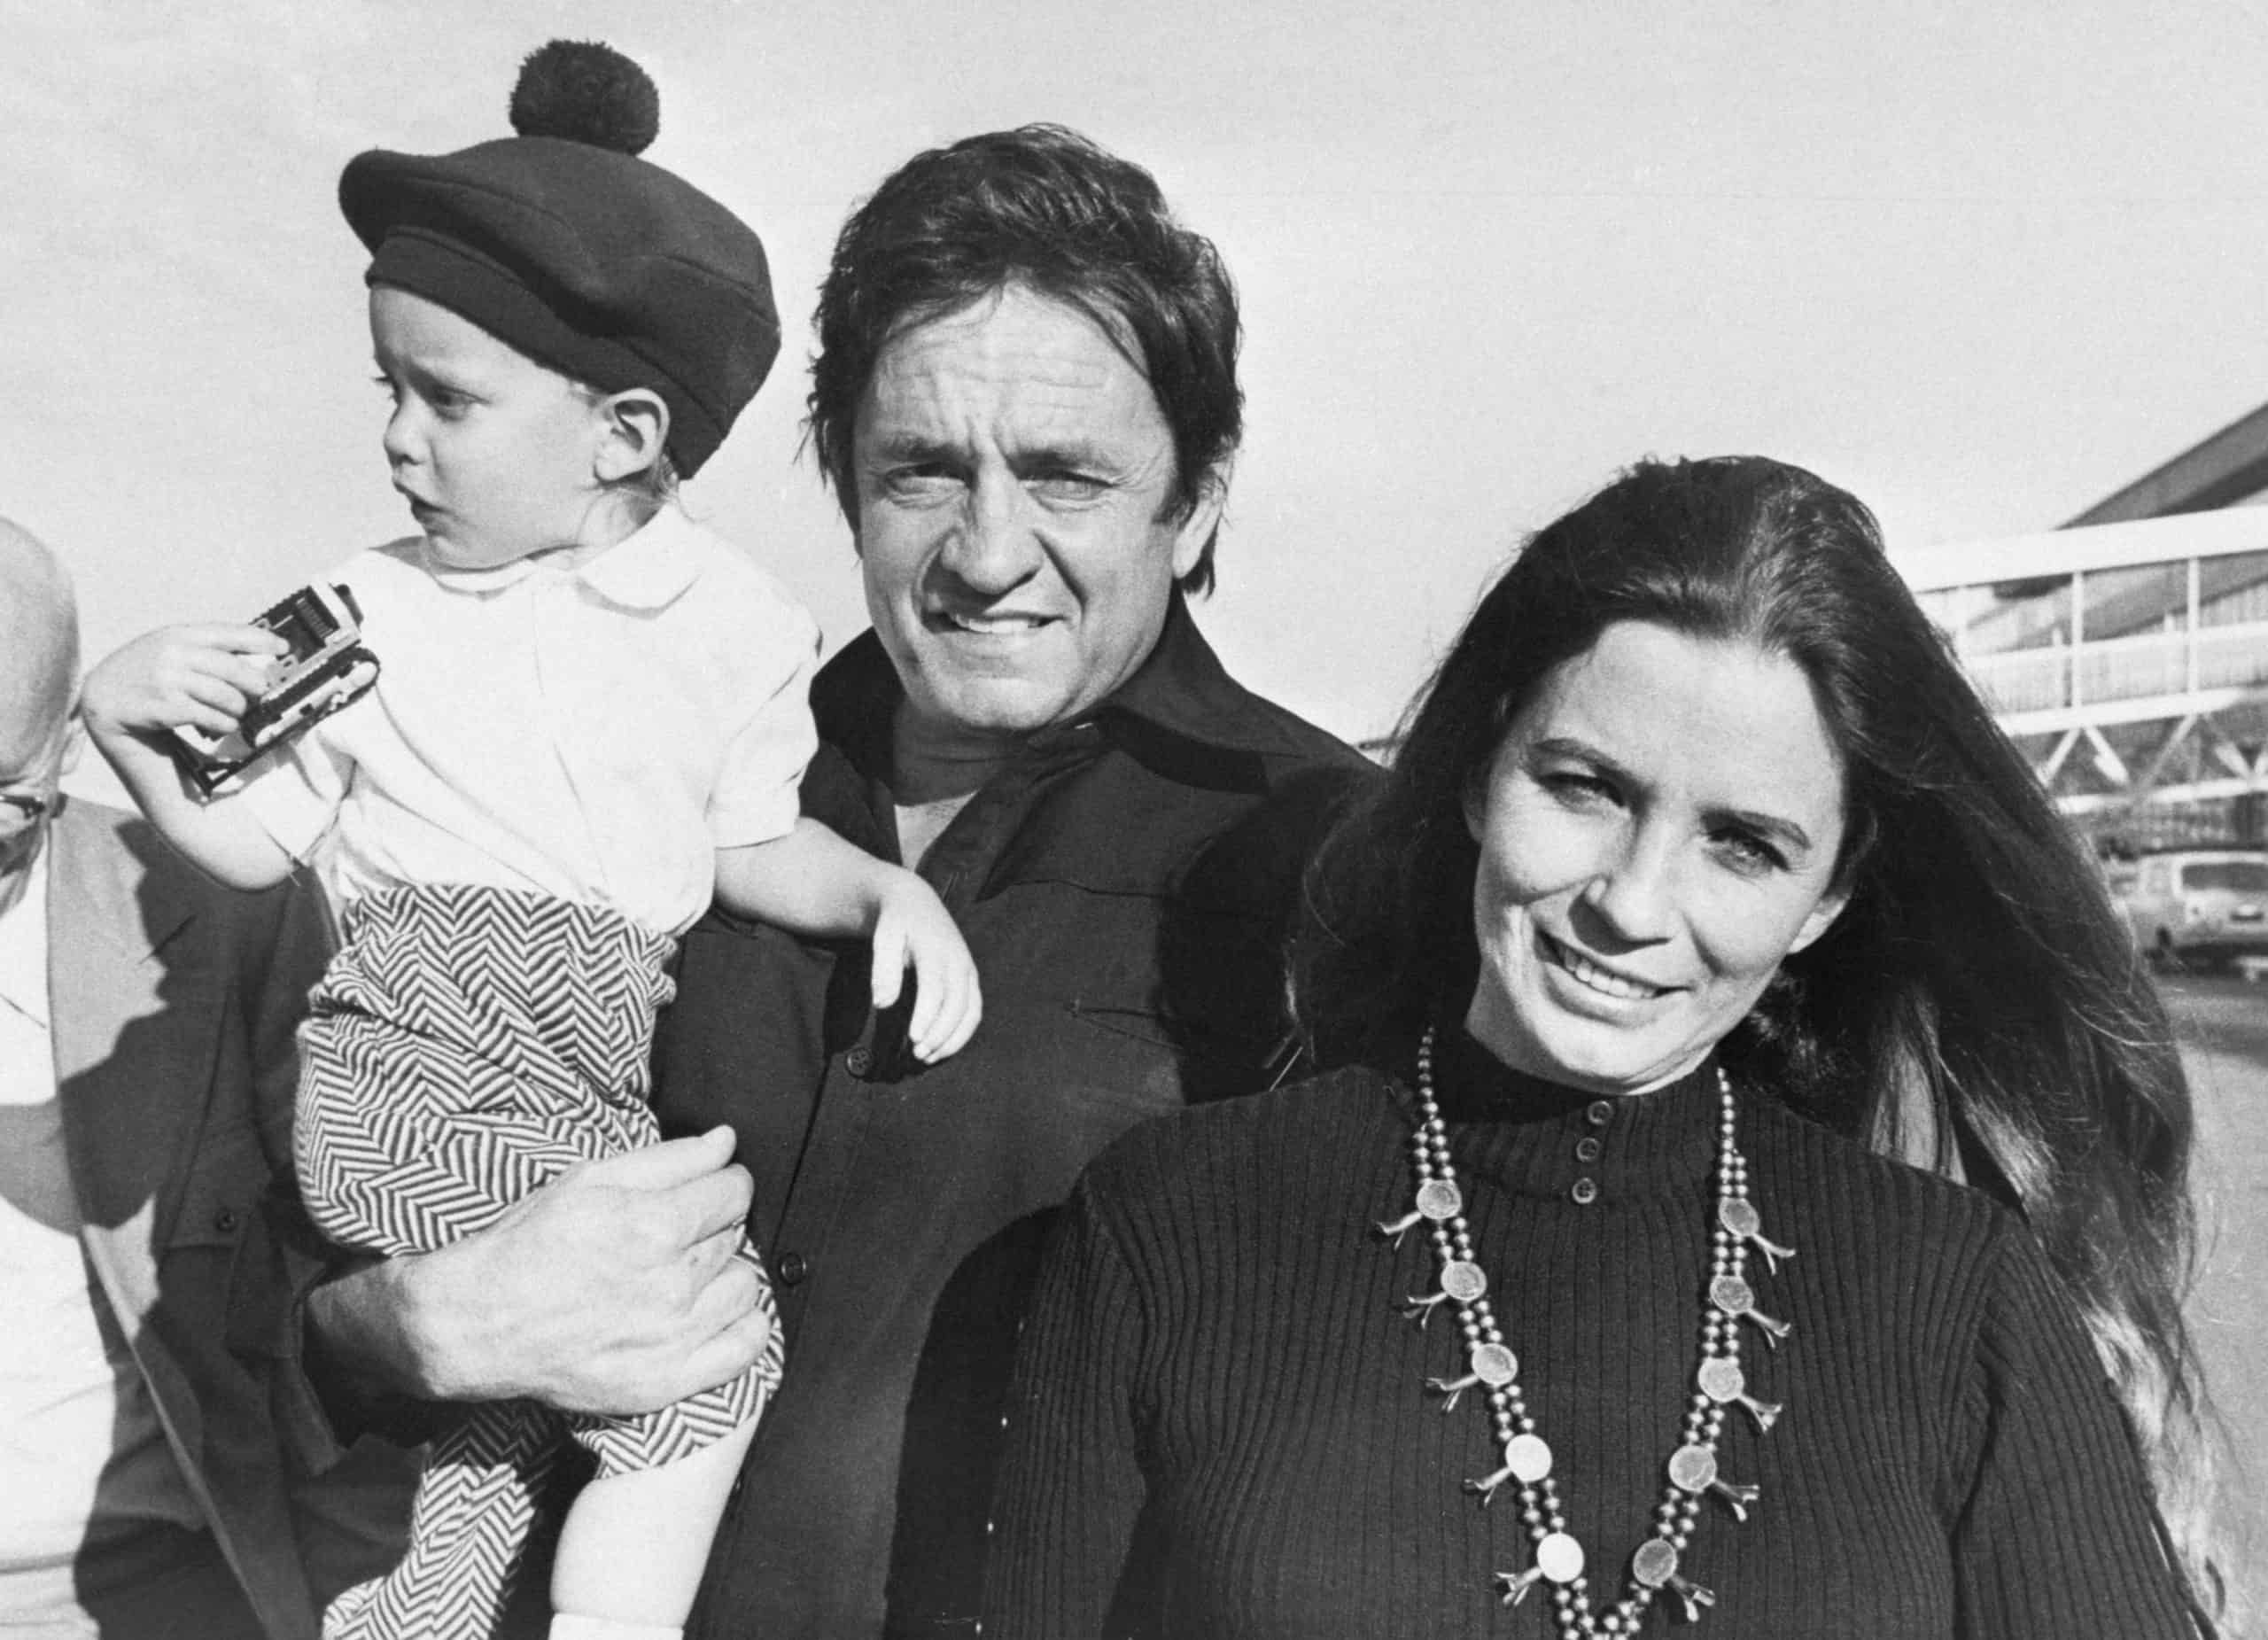 Why Did Johnny Cash Disinherit His Daughters?